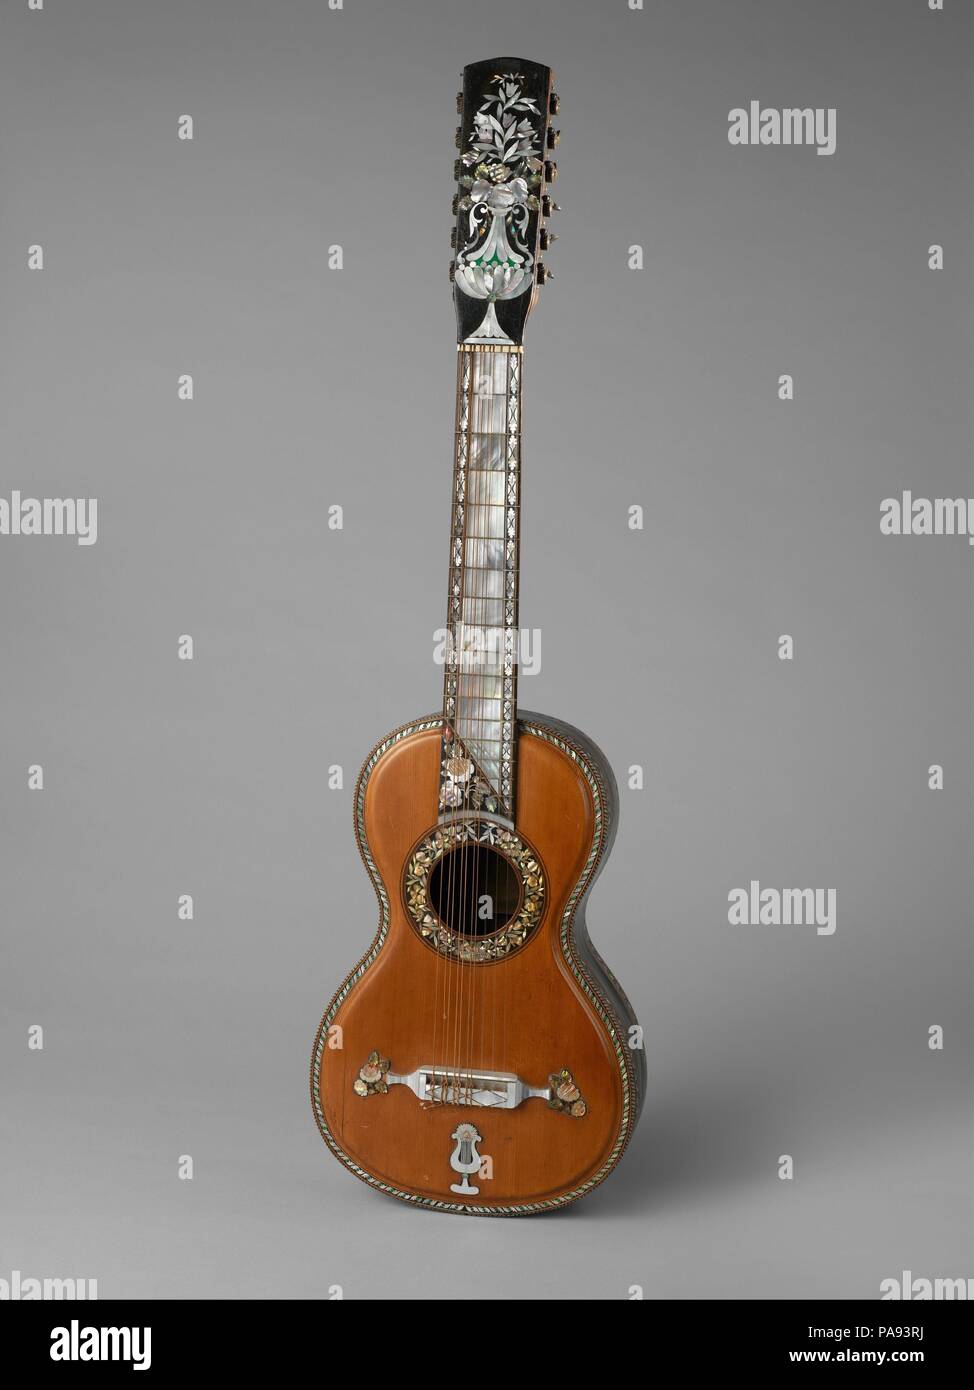 Guitarra septima (seven string guitar). Culture: Mexican. Dimensions: Height: 51 3/8 in. (130.5 cm)  Width: 11 3/4 in. (29.8 cm). Maker: M. Fernandez (Mexican). Date: ca. 1880.  Mariano Fernández, Guitarra Séptima (Seven-course guitar)  2012.569  The Mexican seven-course guitar reached the height of its popularity during the 19th century.  It was used to perform music in a variety of genres, most of it written by Mexican composers. This beautifully crafted instrument by Mariano Fernández epitomizes guitar making in Mexico at its highest level. Inlaid mother-of-pearl, abalone and wood trace int Stock Photo